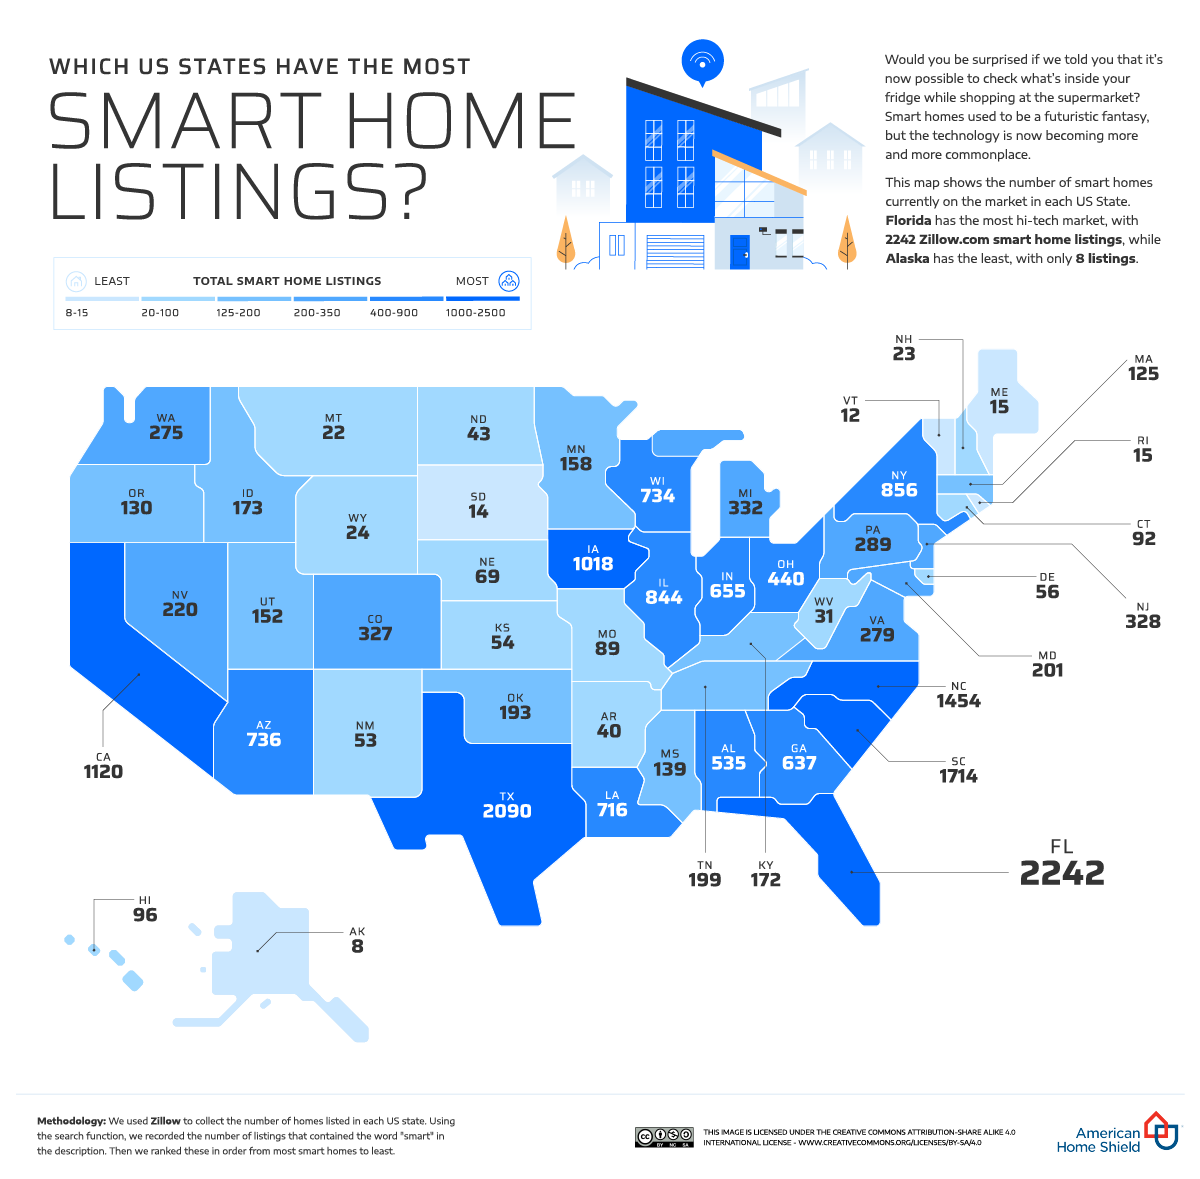 Which US Cities and States Have the Most Smart Home Listings Overall